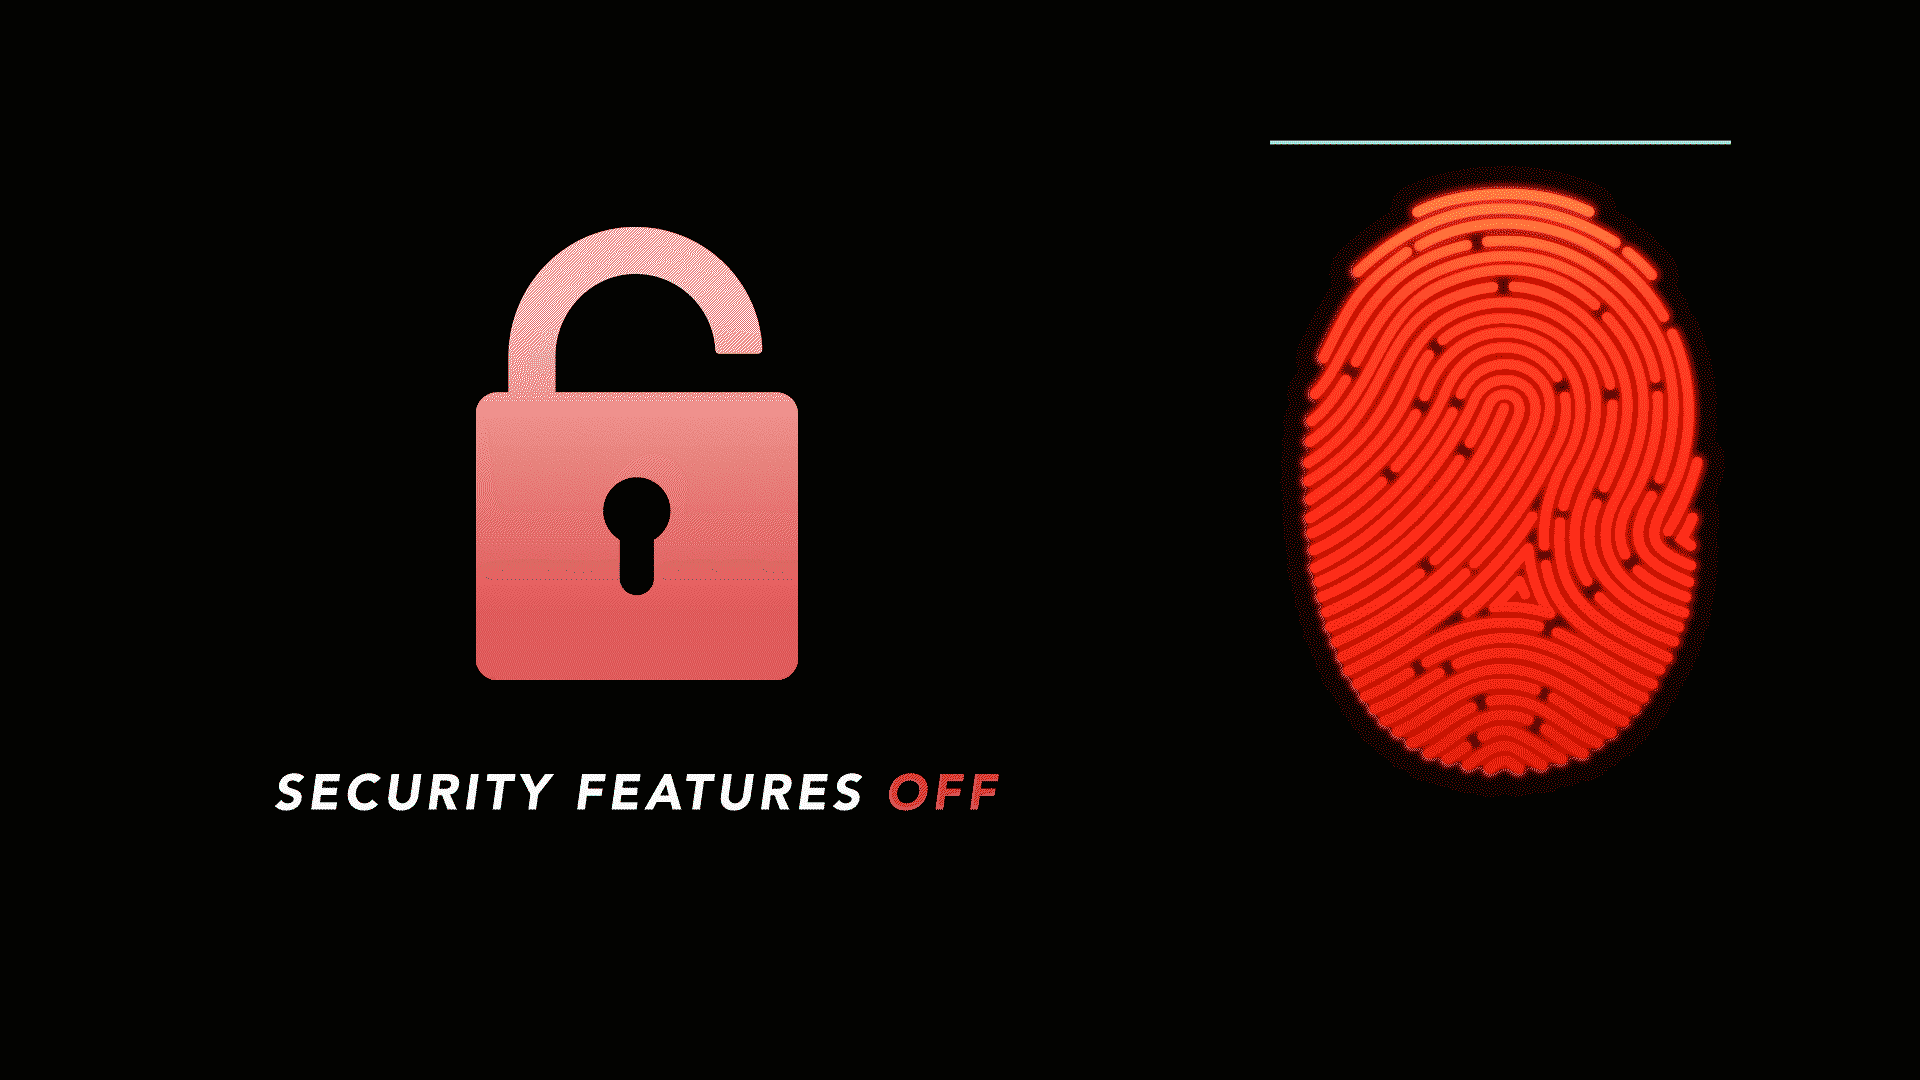 Turn on Essential Security Features Before It’s Too Late